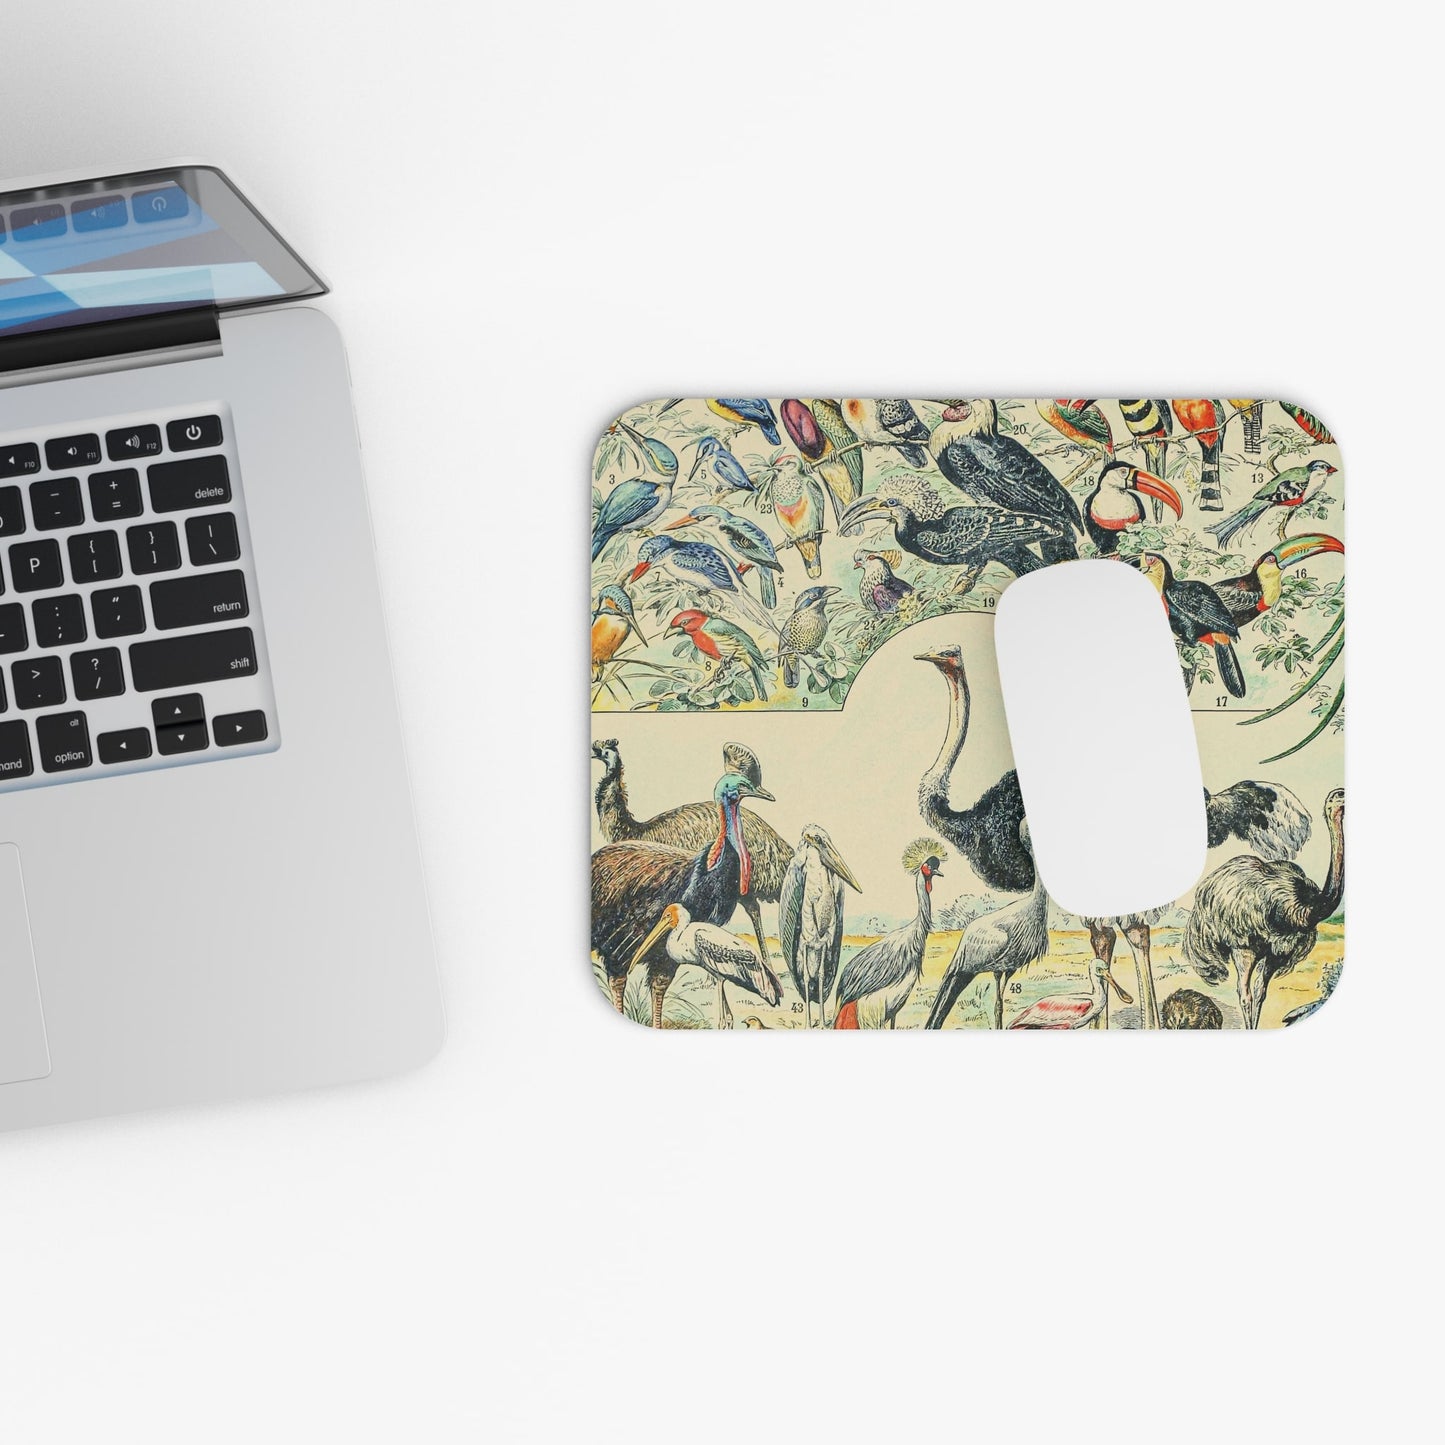 Vintage Collection of Birds Design Laptop Mouse Pad with White Mouse